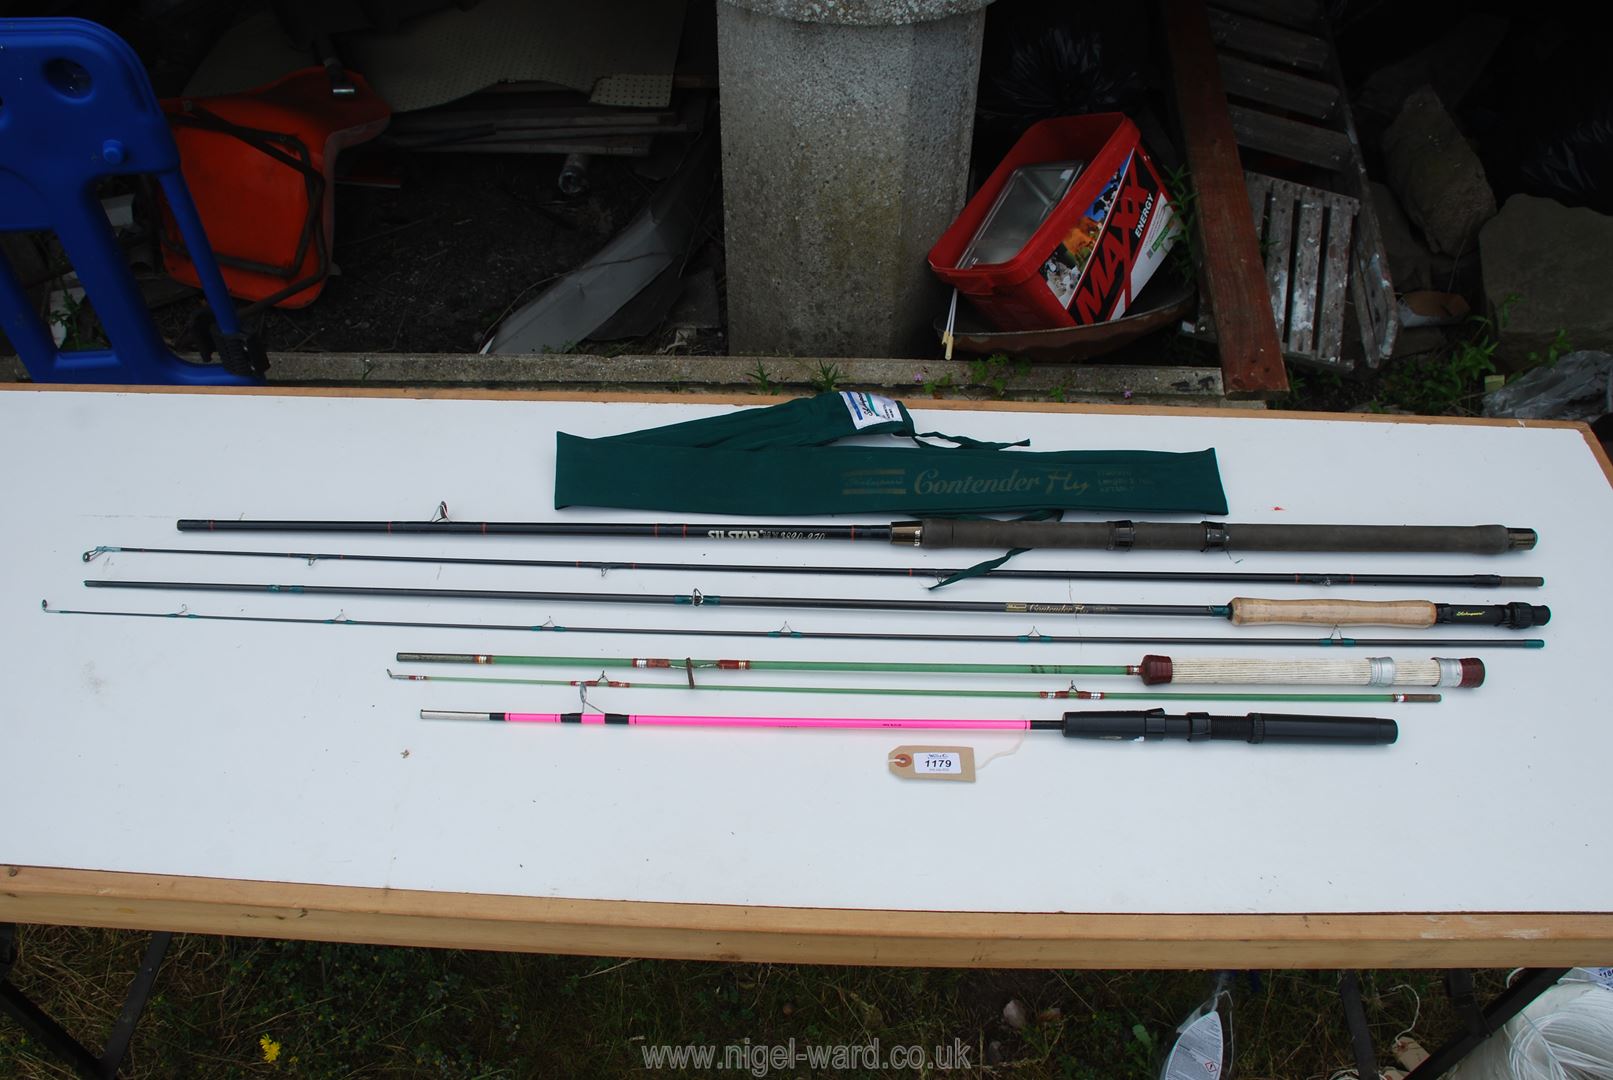 Three Fishing Rods including 'Silstar' 2.7 metre composite rod, 'Shakespeare Contender' 2.